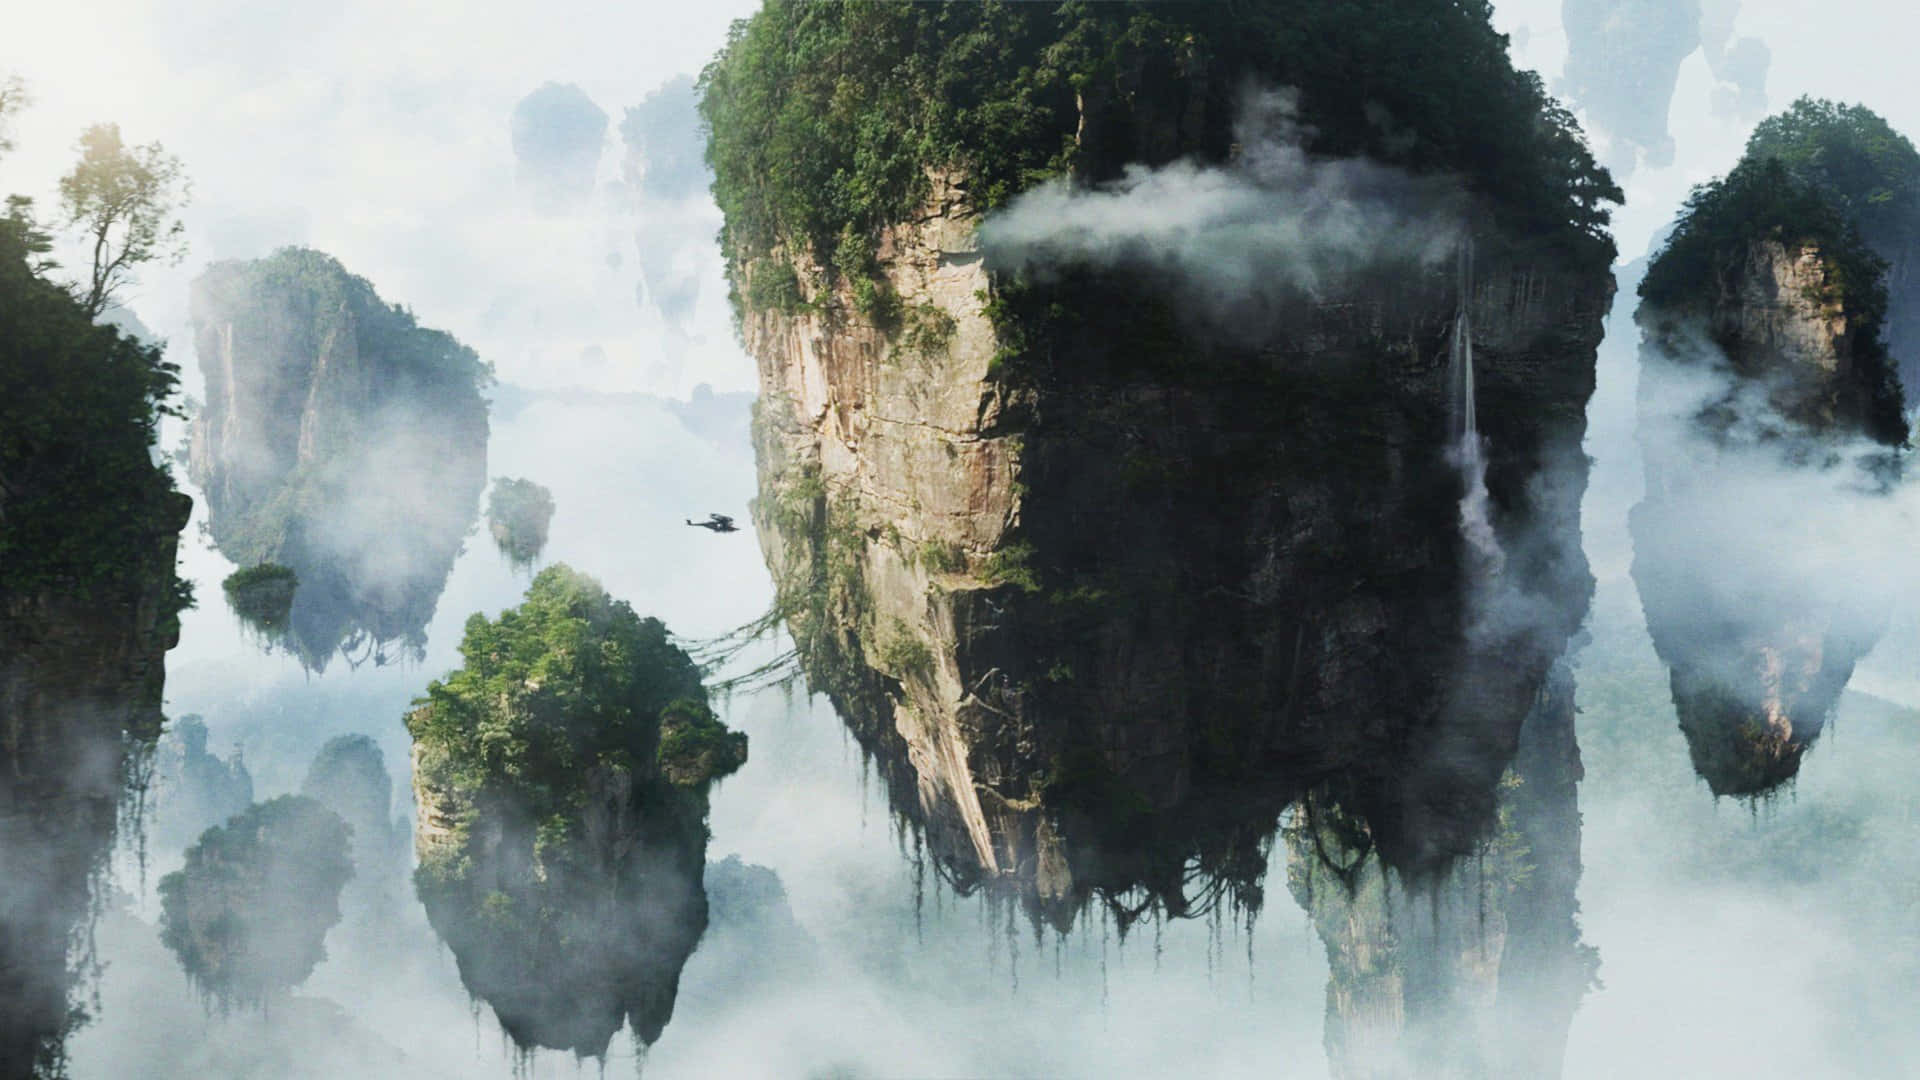 Welcome to the mystical valley of Pandora Wallpaper